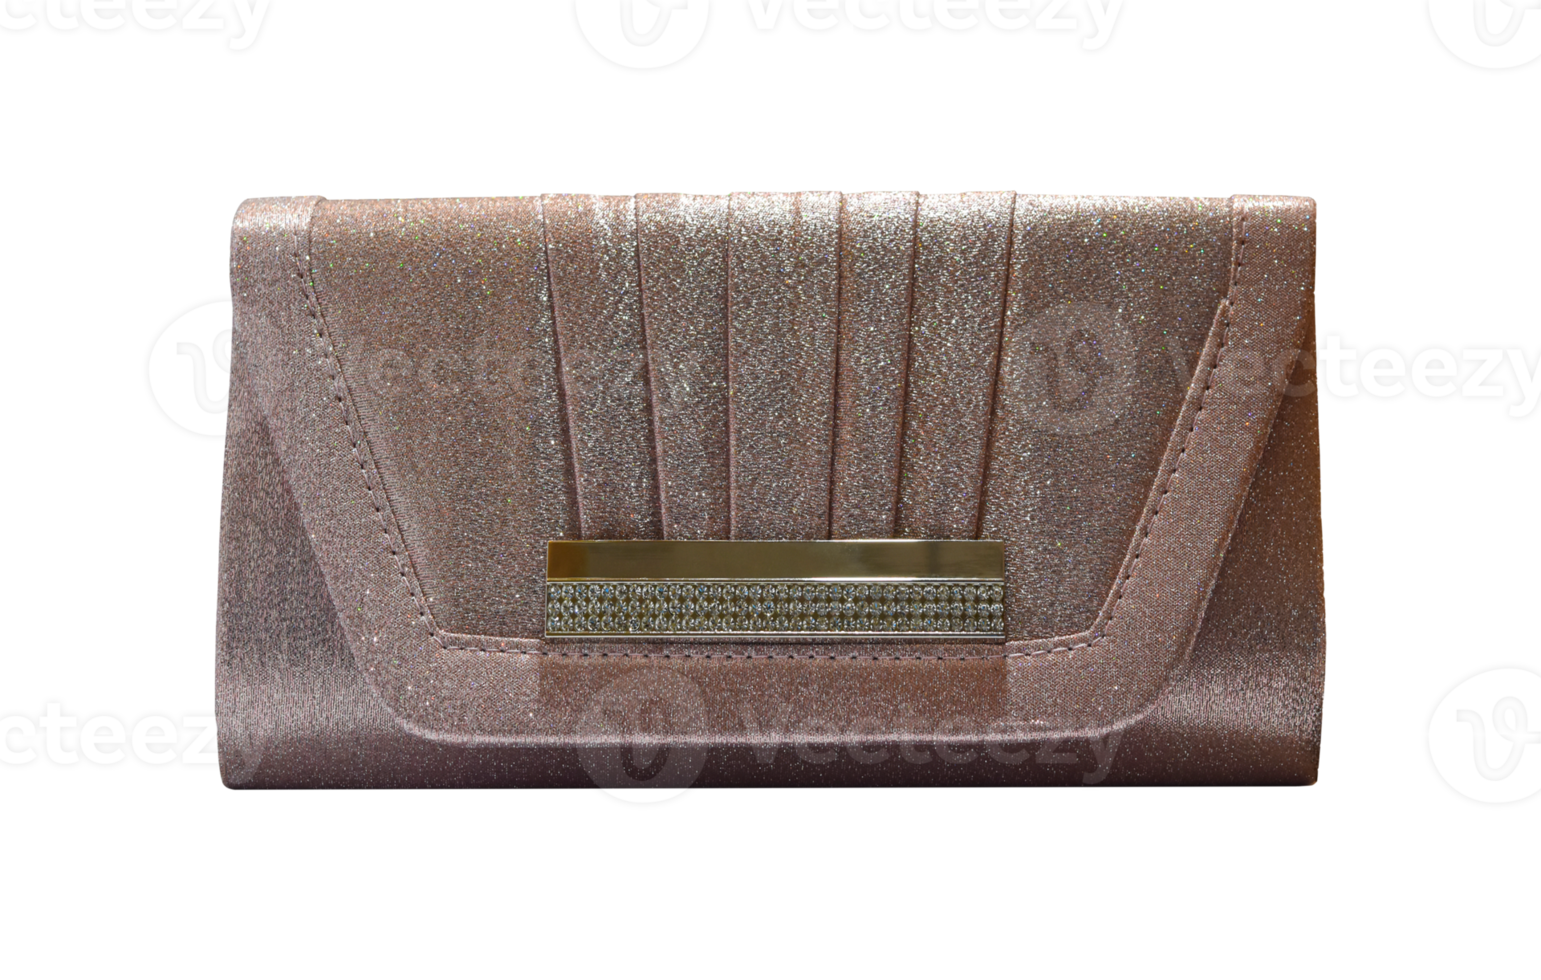 Clutch bag, Female bag Isolated. png